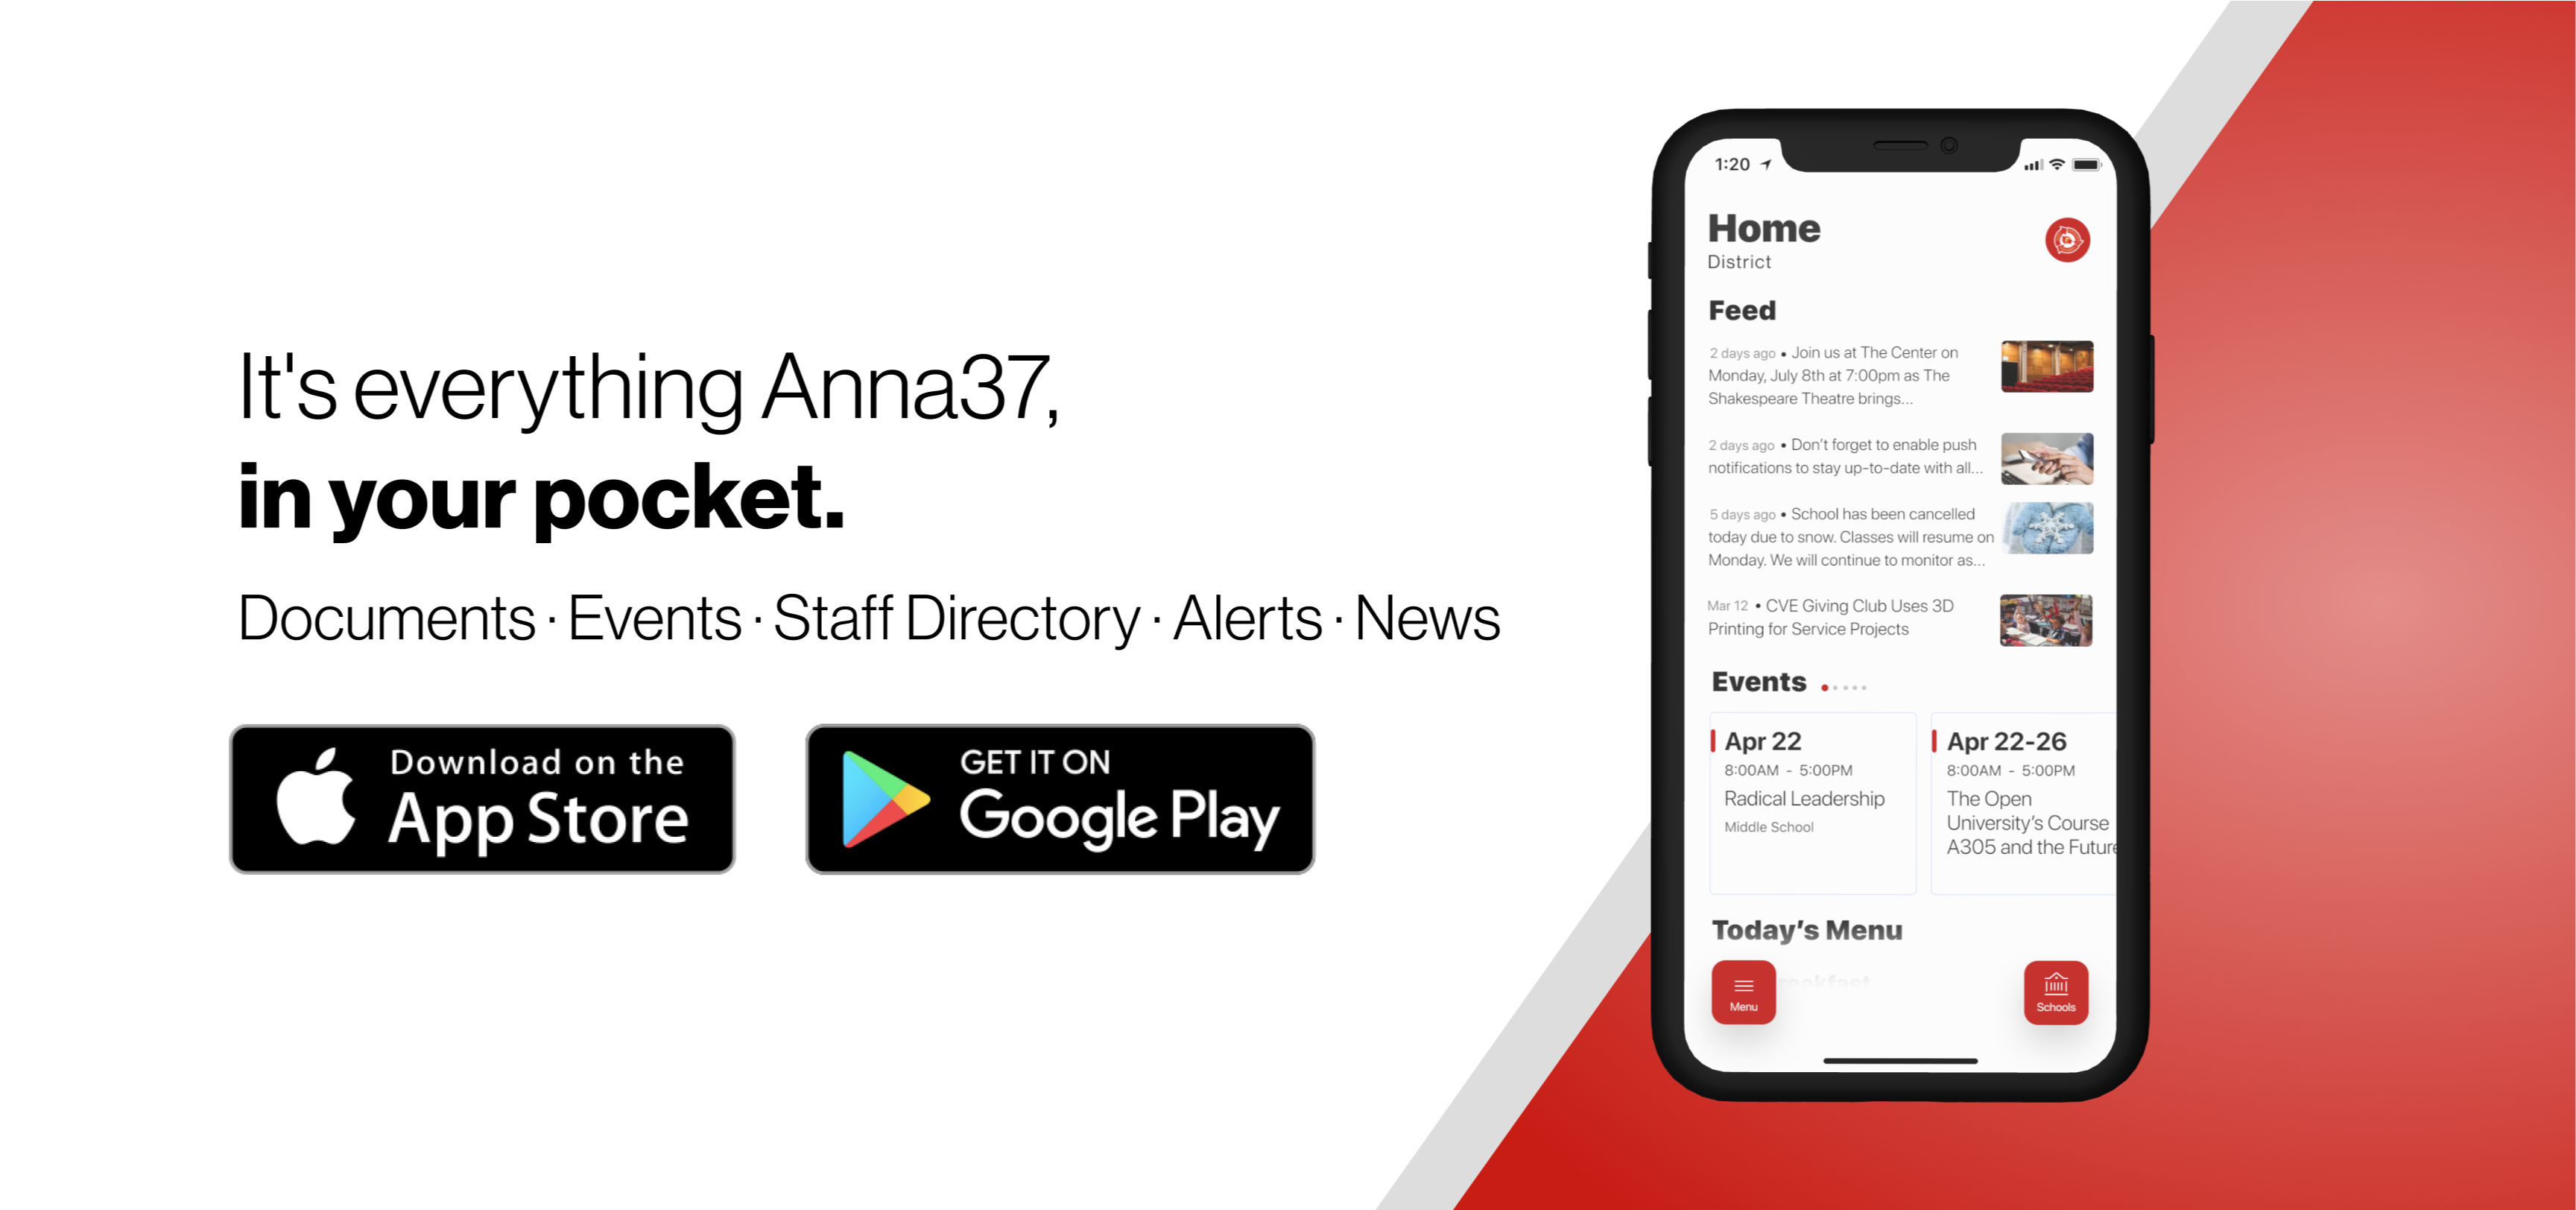 Image of mobile app open with links to App store and Google Play, "It's everything Anna 37 in your pocket. Documents-Events-Staff Directory-Alerts-News"